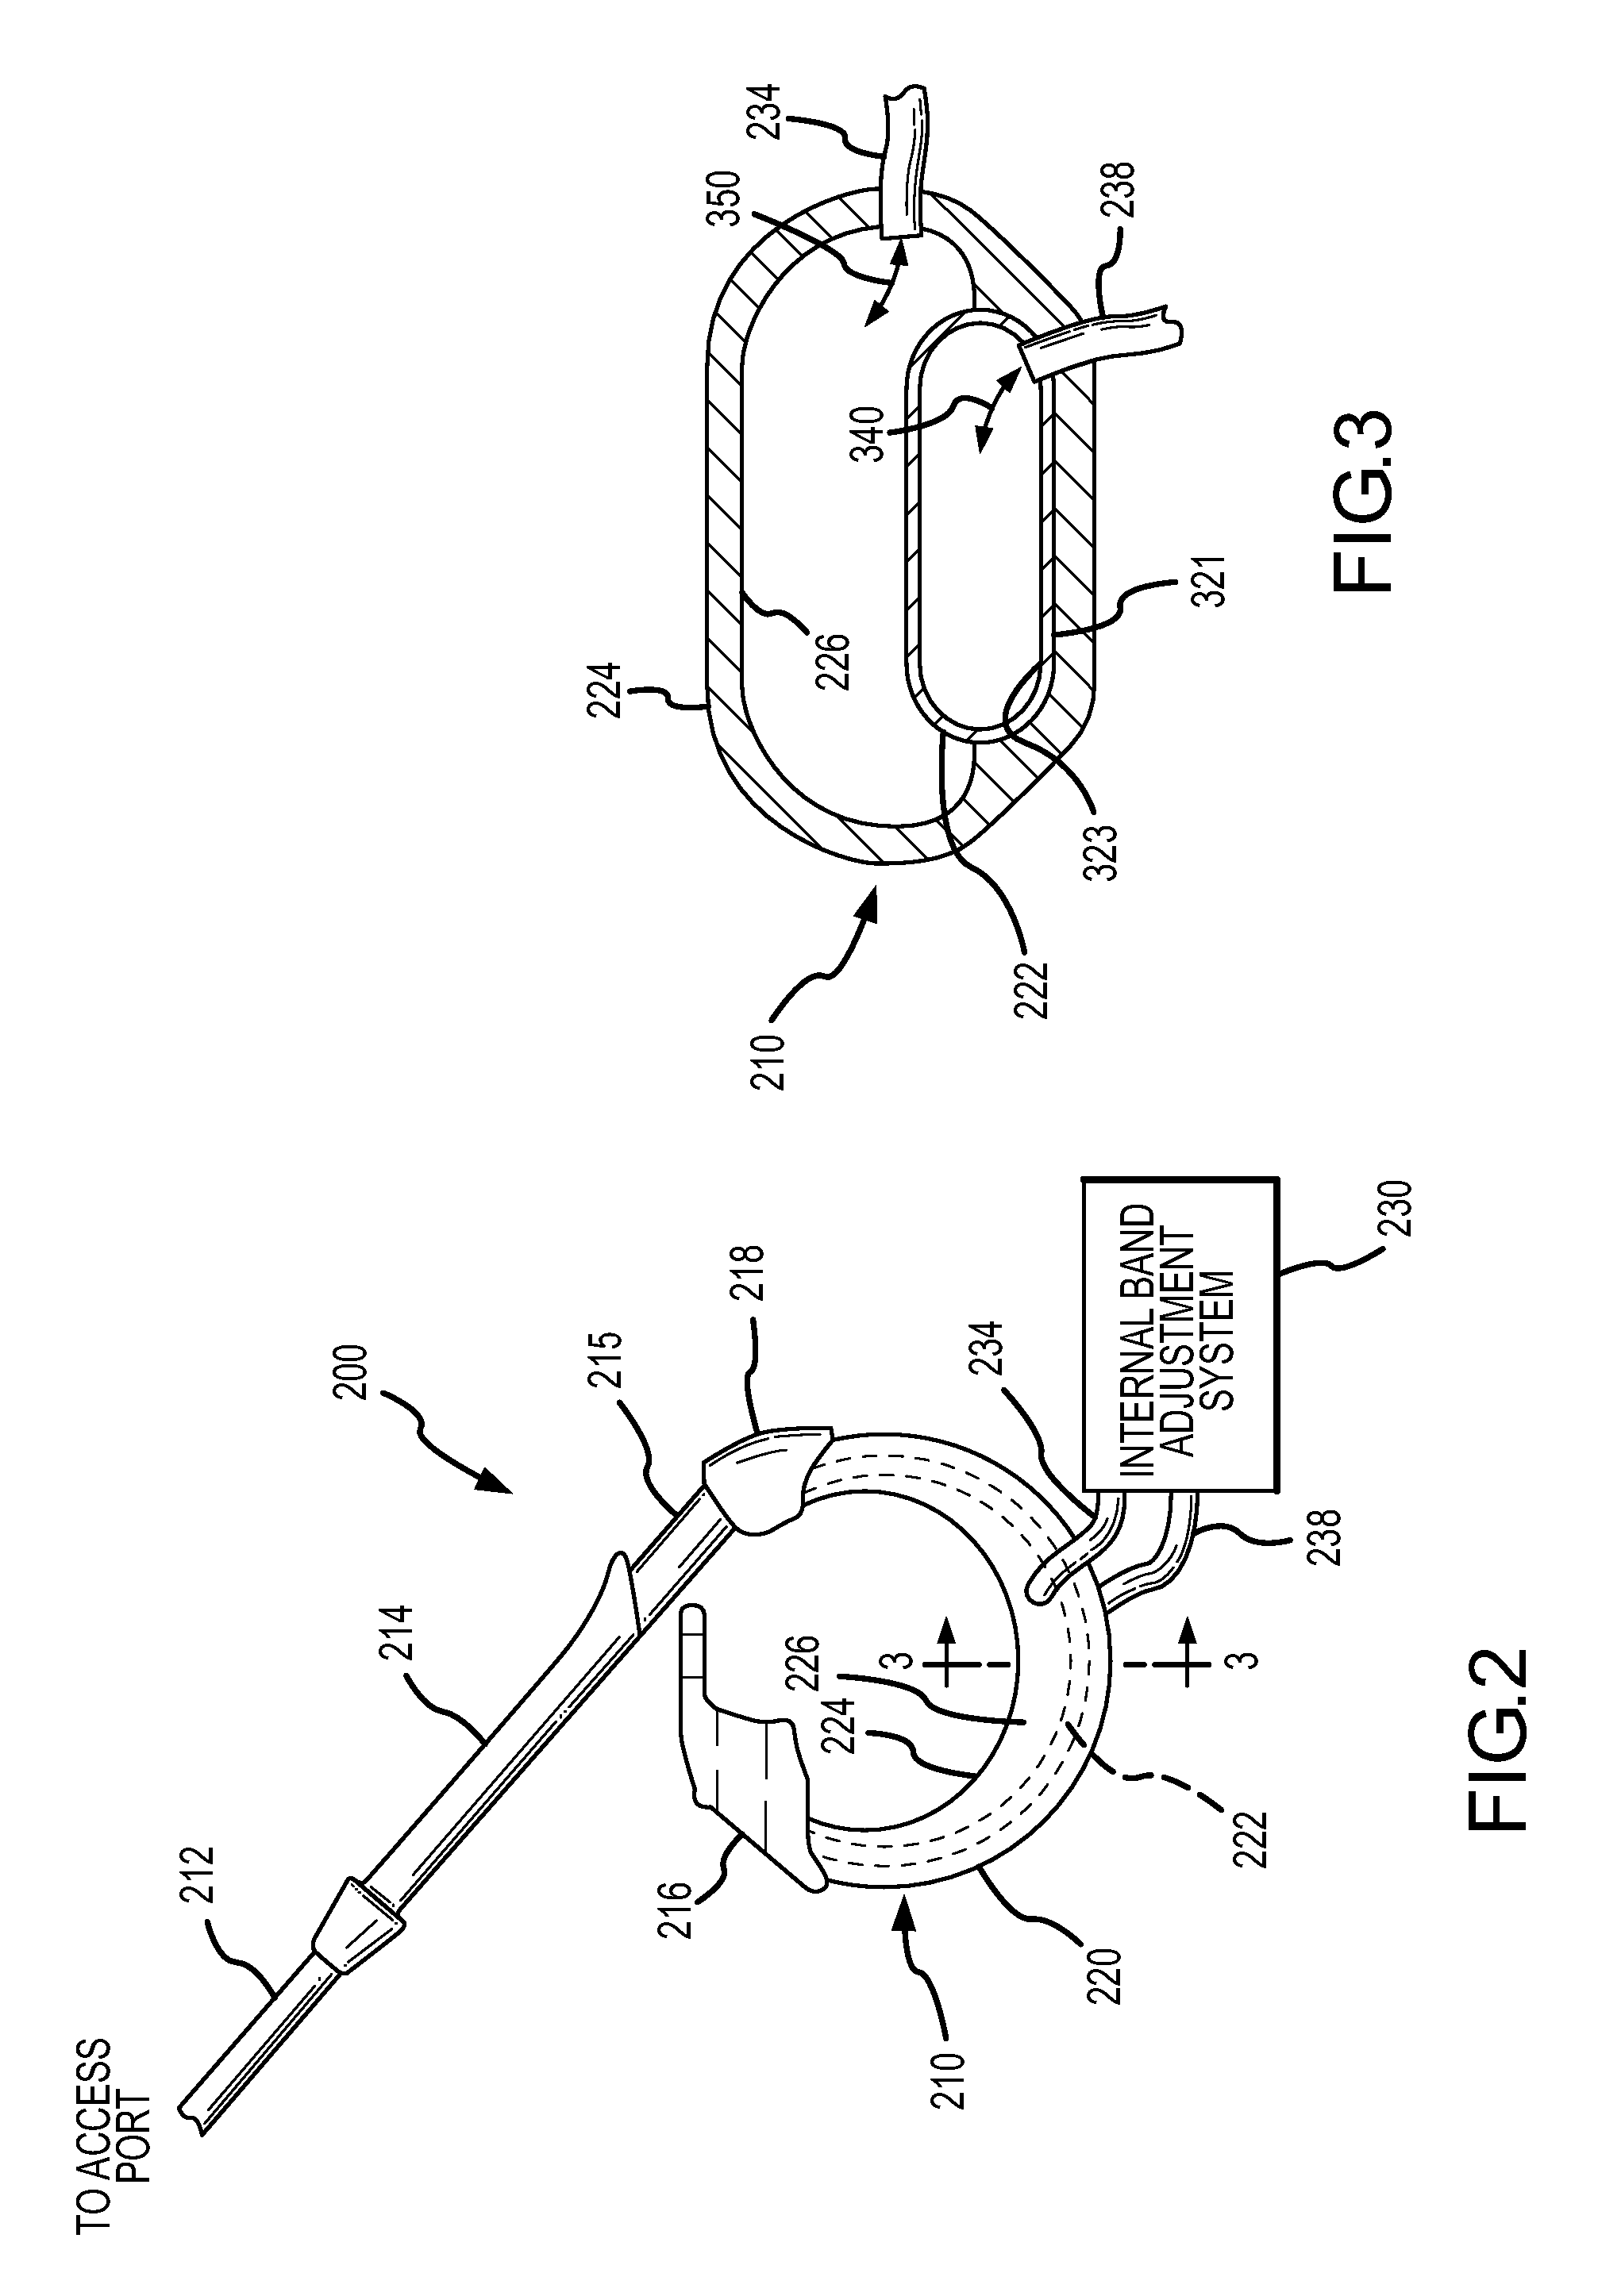 Hydraulic gastric band with collapsible reservoir